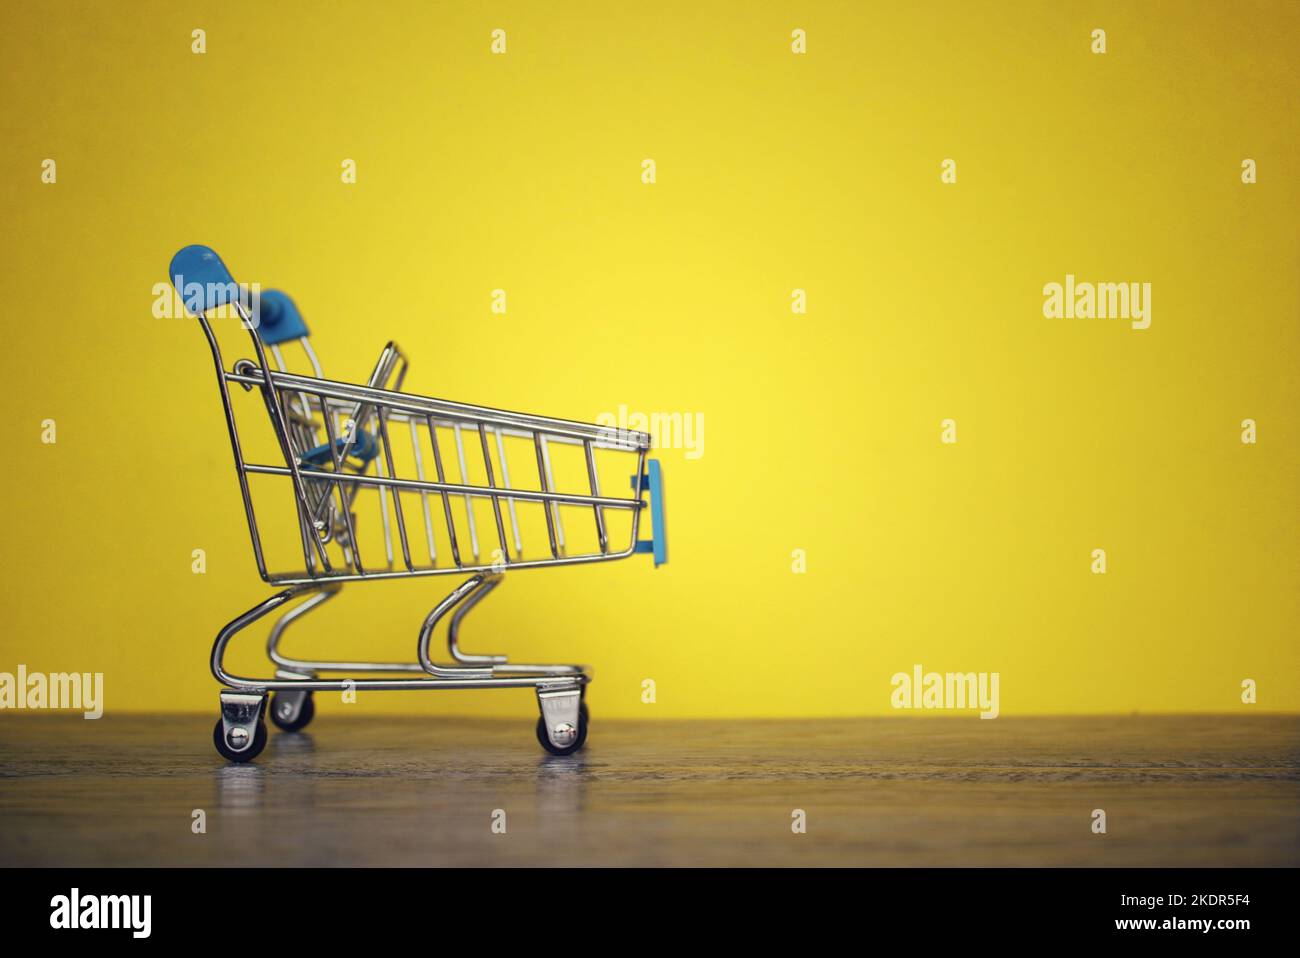 Mini shopping trolley on yellow background with copy space. Shopping and consumer concept. Stock Photo